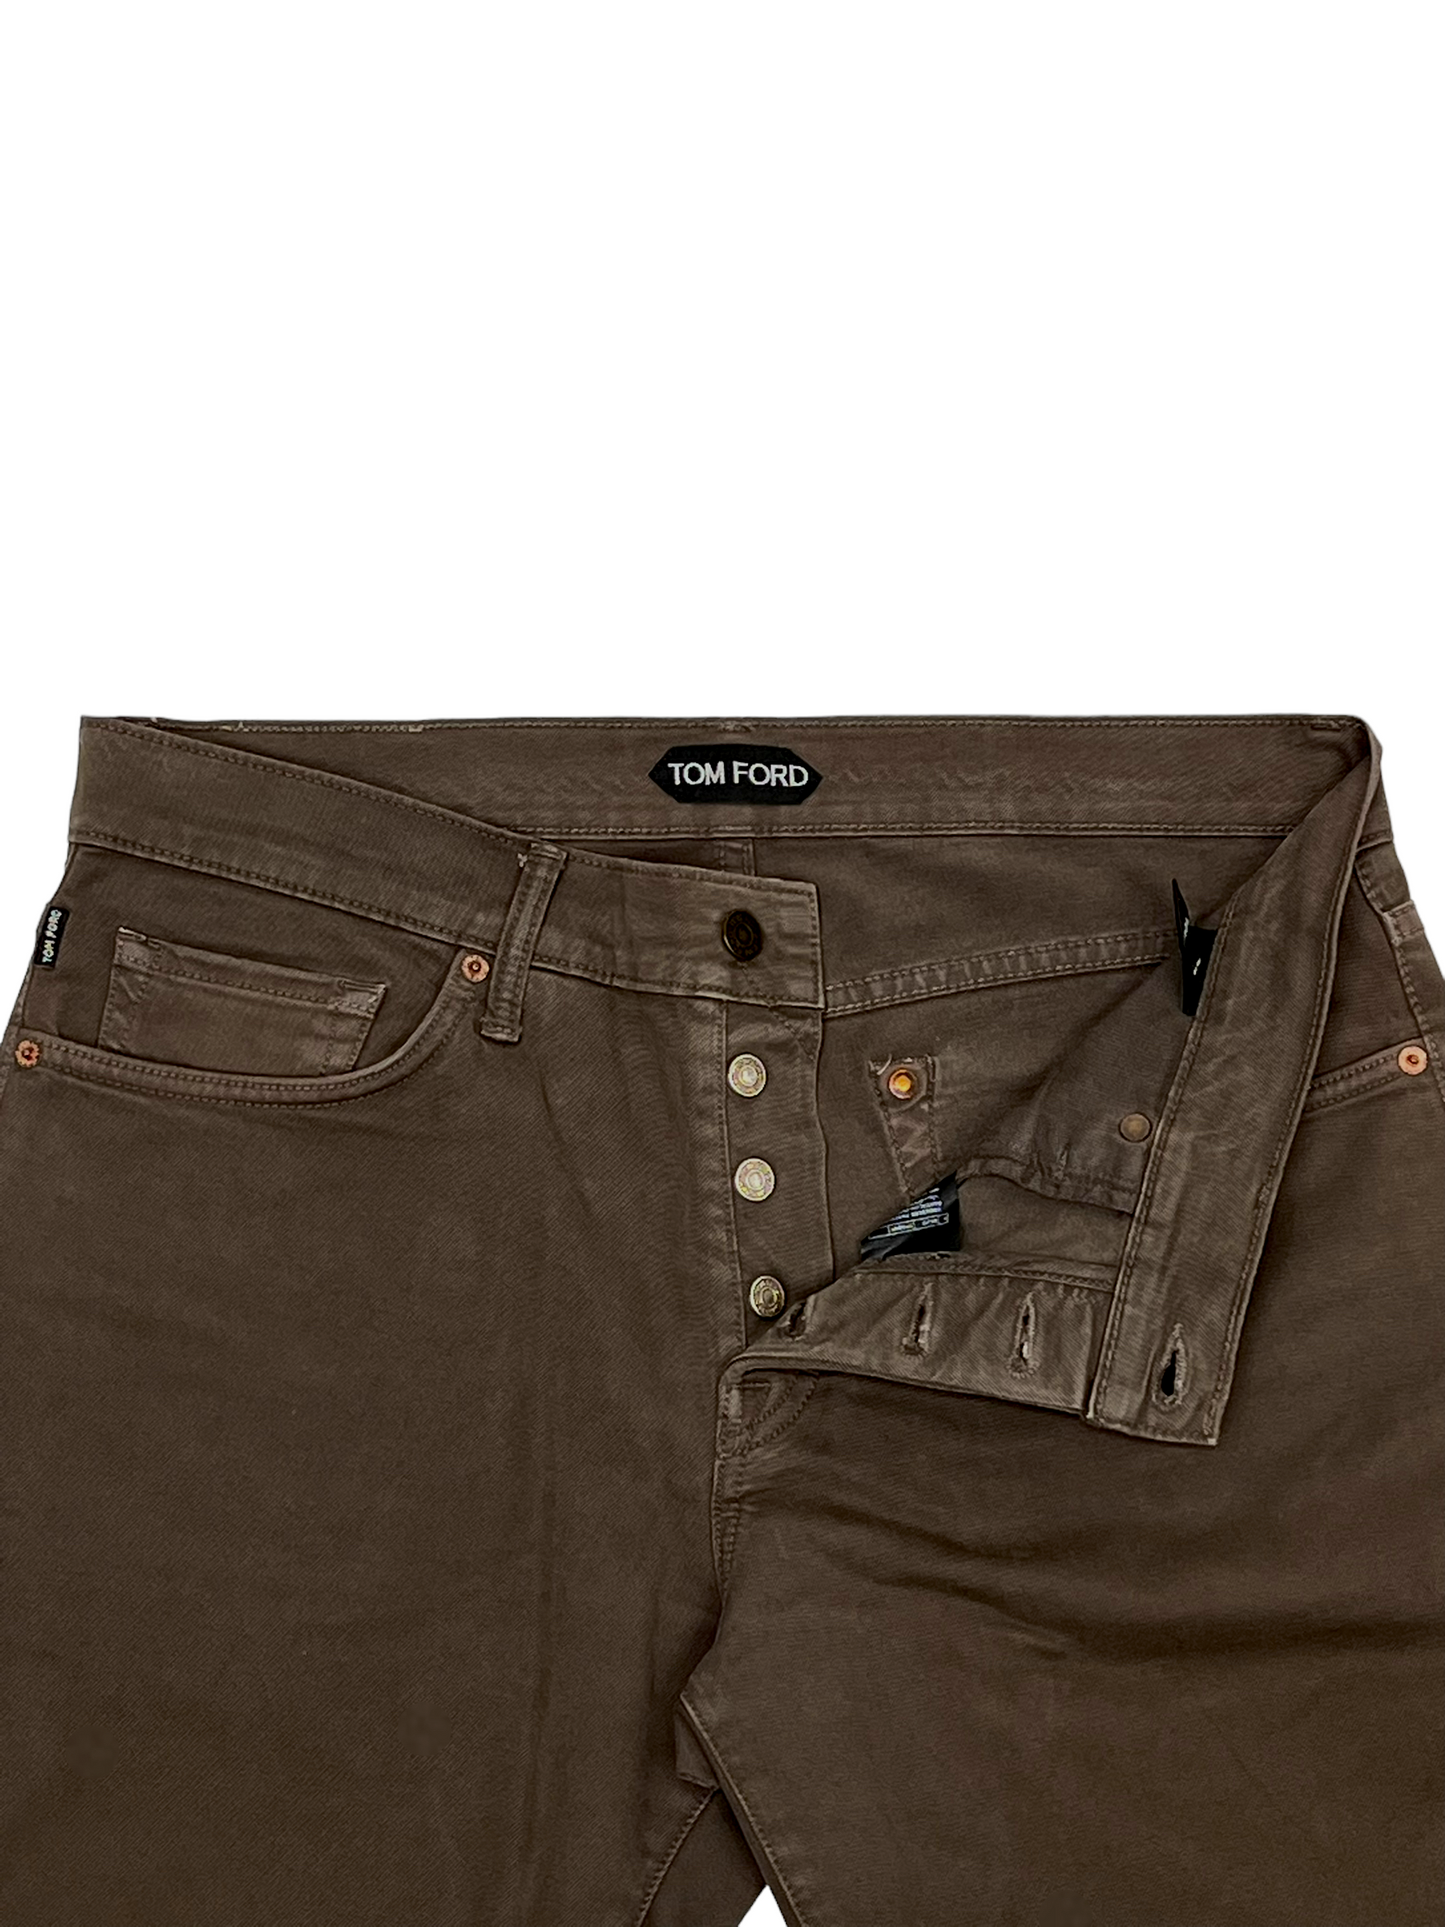 Tom Ford Faded Brown Casual Pants 33W